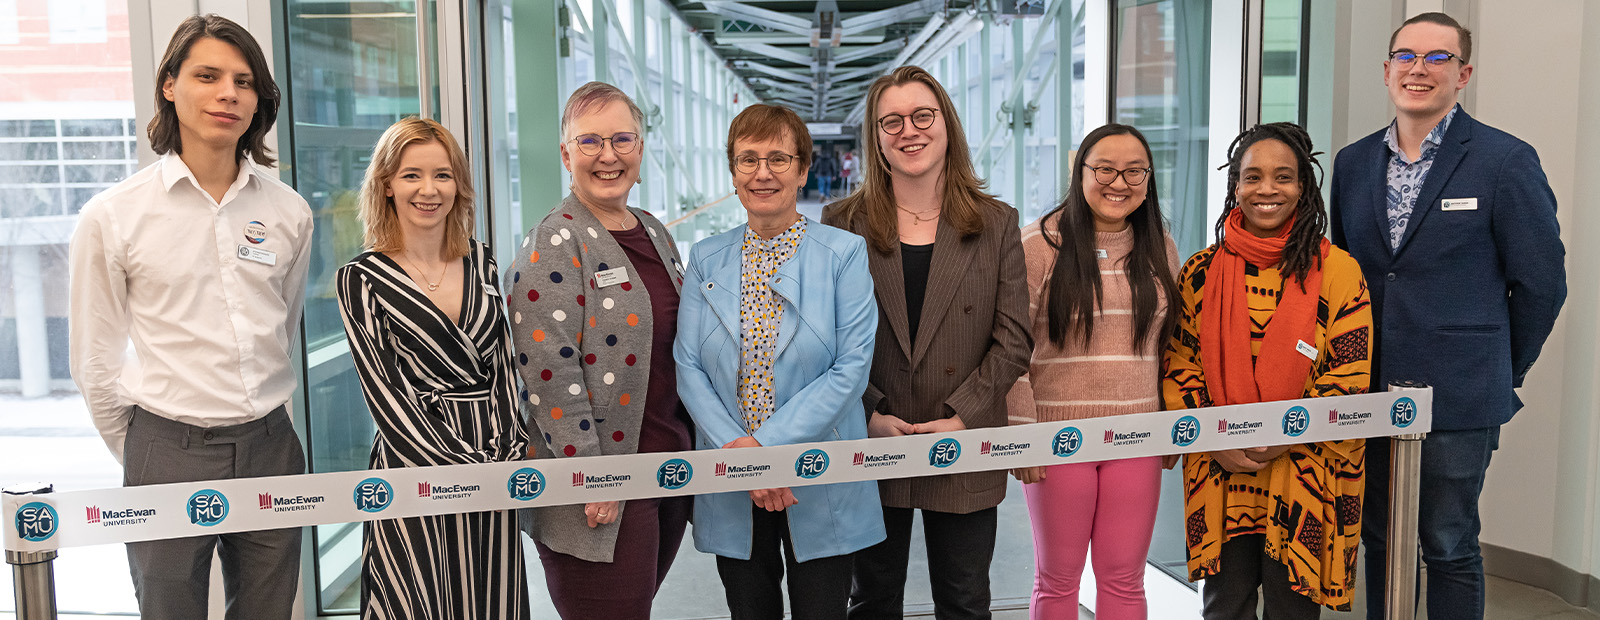 Members of SAMU student executive team and staff are joined by MacEwan Board Chair Carolyn Graham, MacEwan President and Vice-Chancellor Dr. Annette Trimbee at the entrance to the 109 Street pedway, where they prepare to cut a ribbon